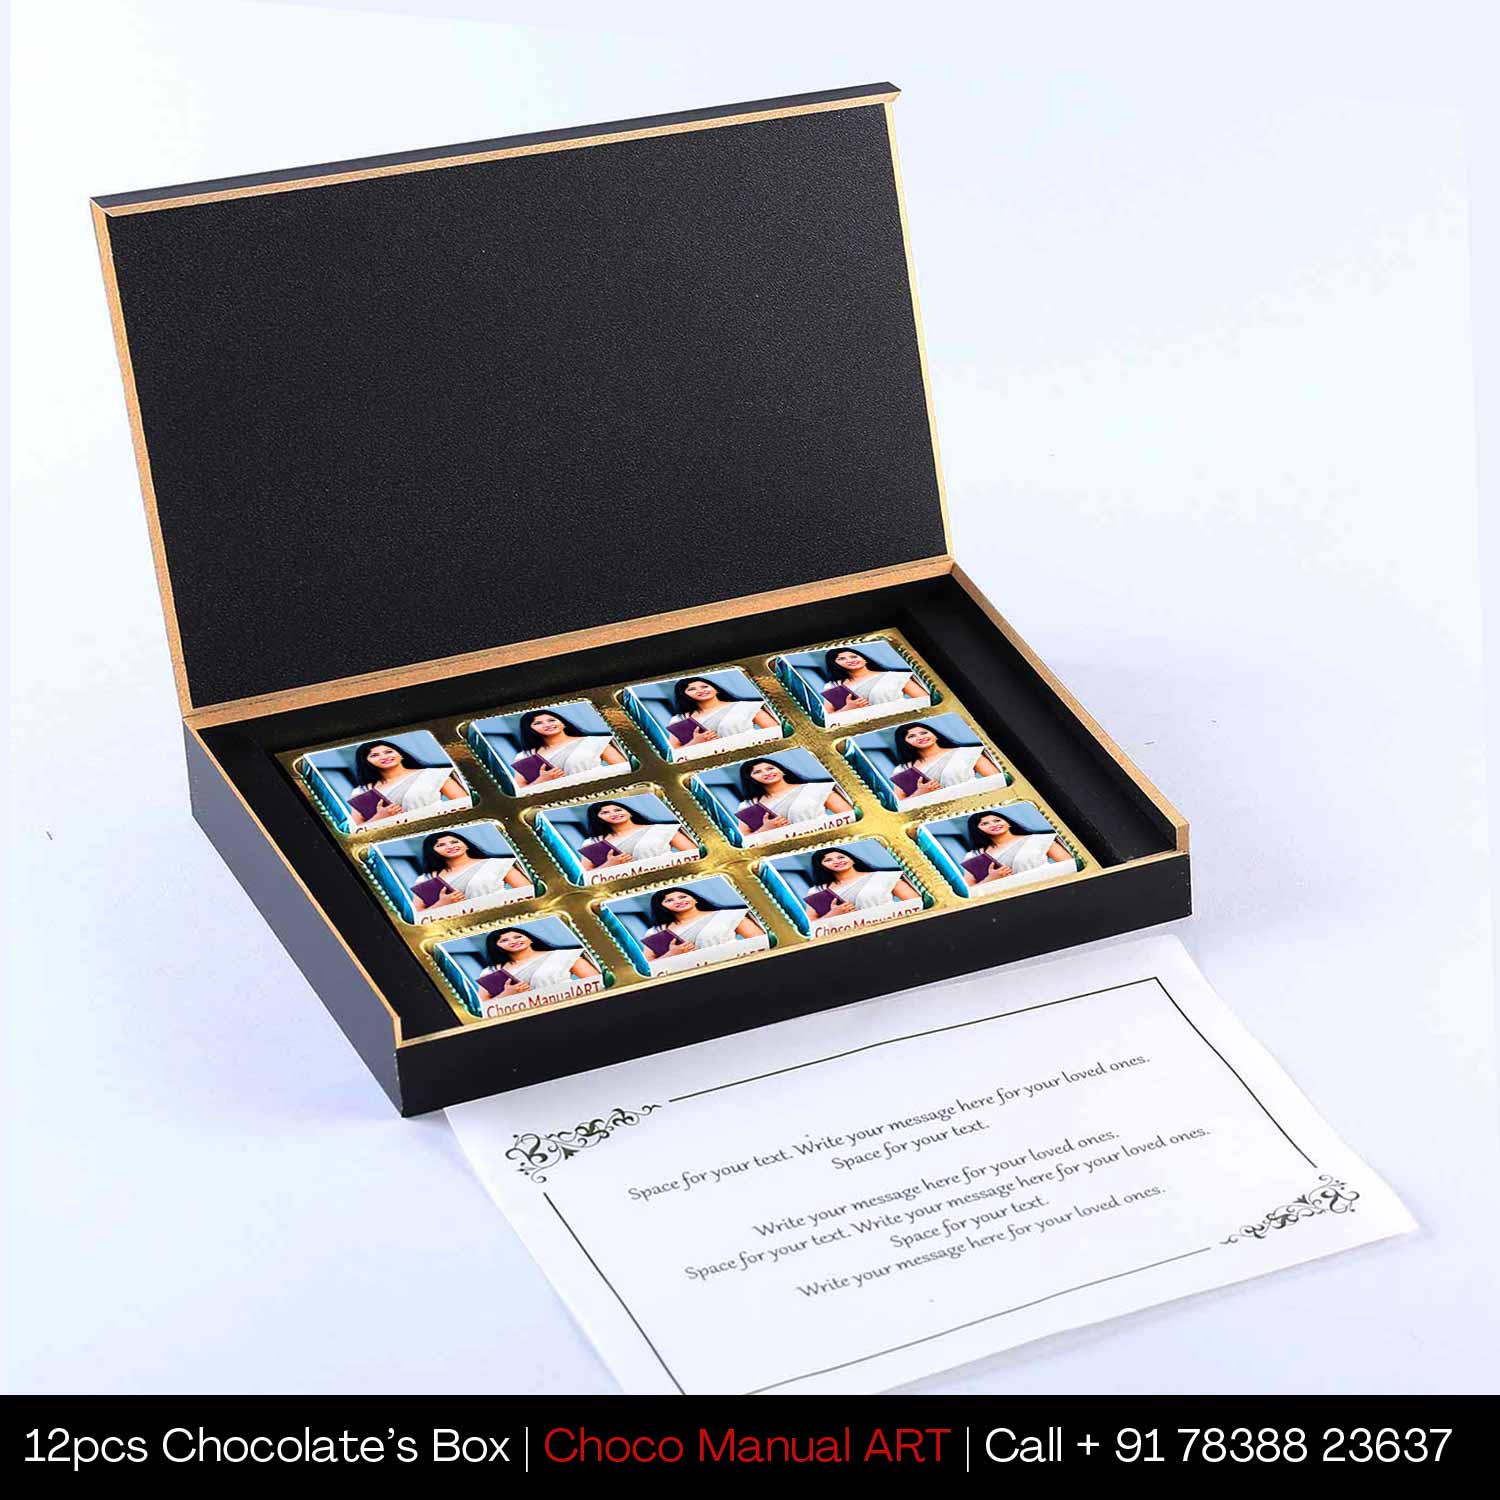 Exoctic women's day gift photo printed chocolates